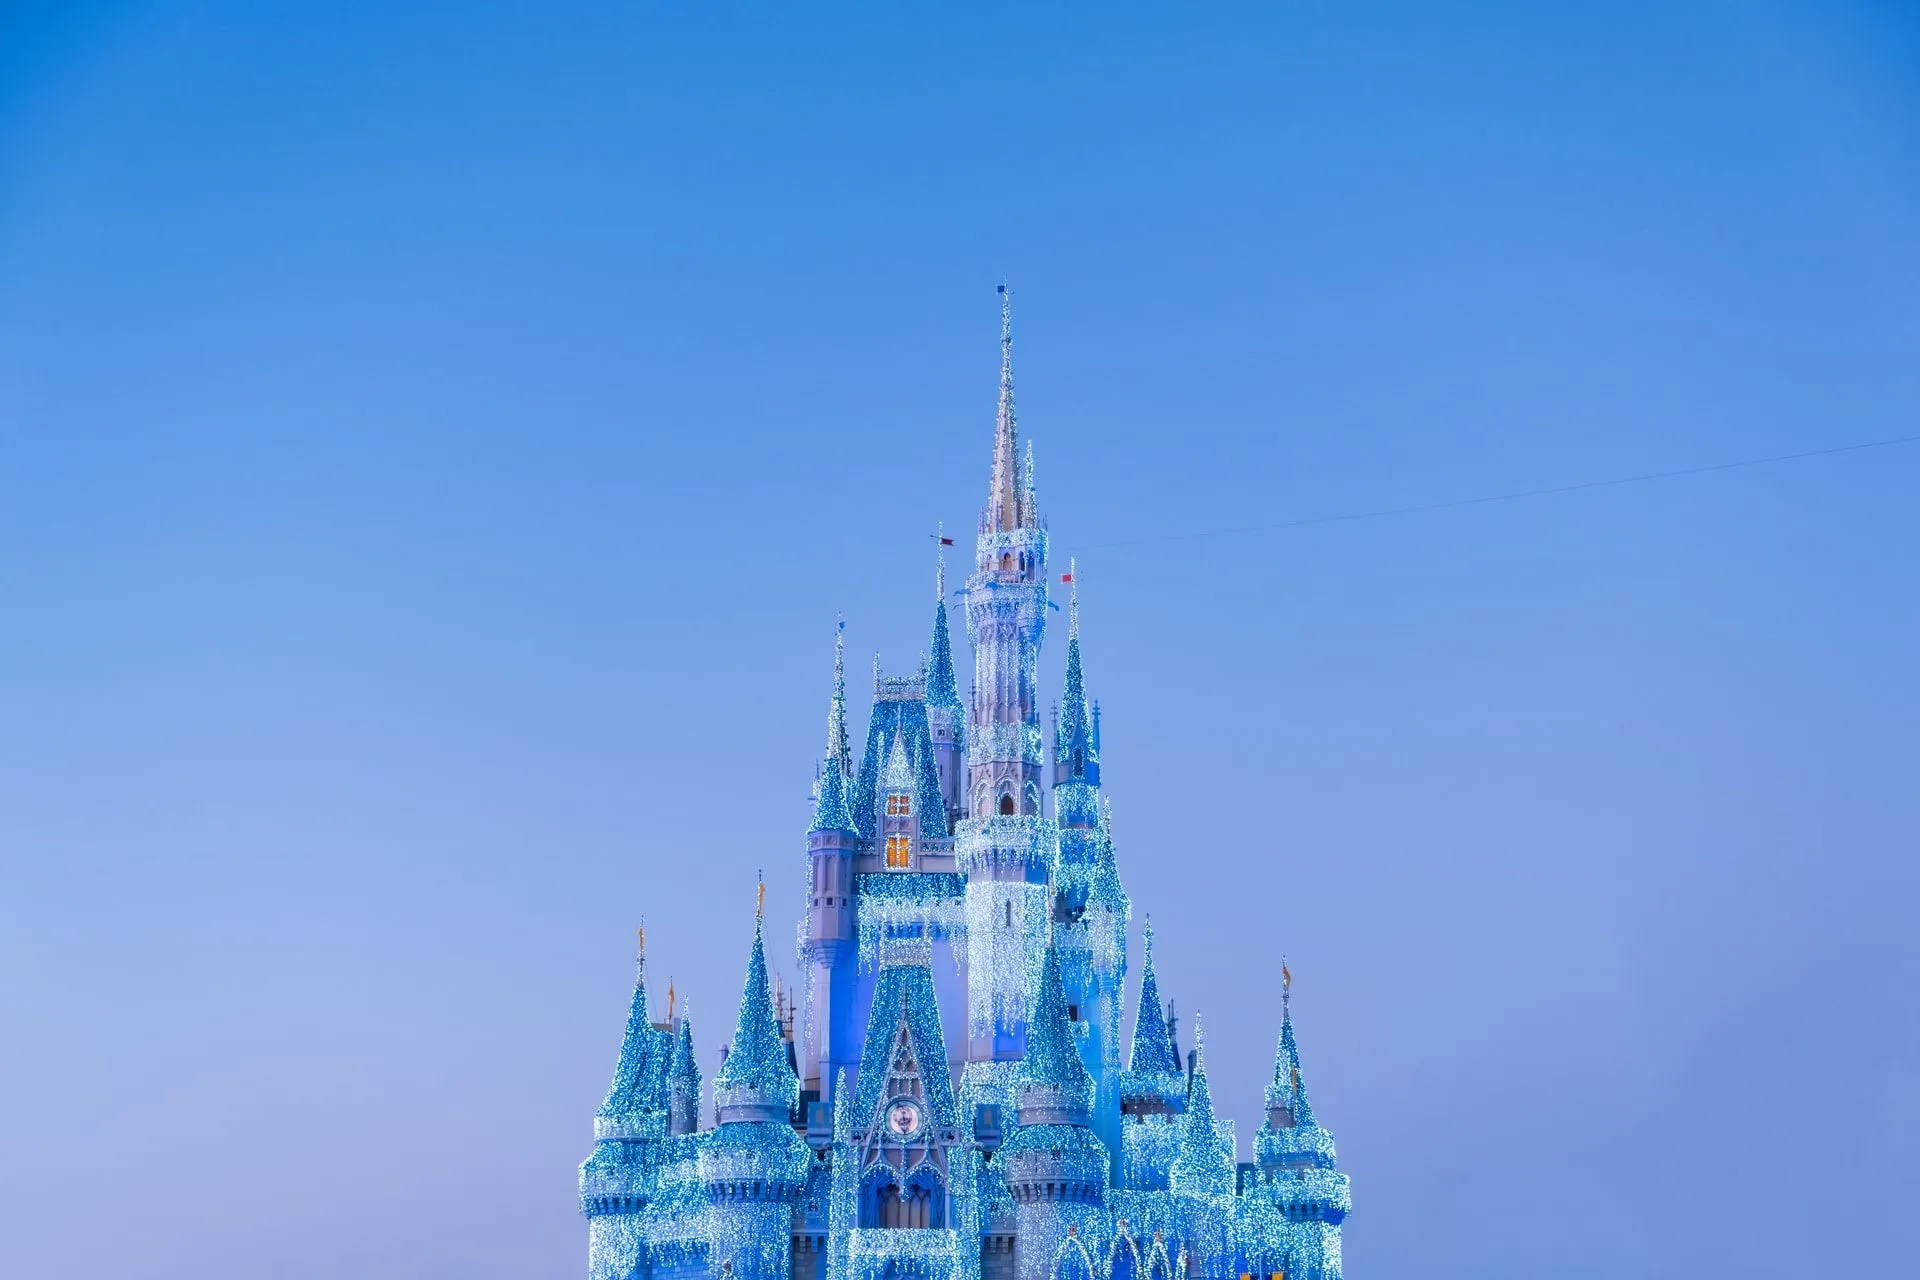 Aside from the character herself, Cinderella's castle is one of the most iconic images associated with the story.